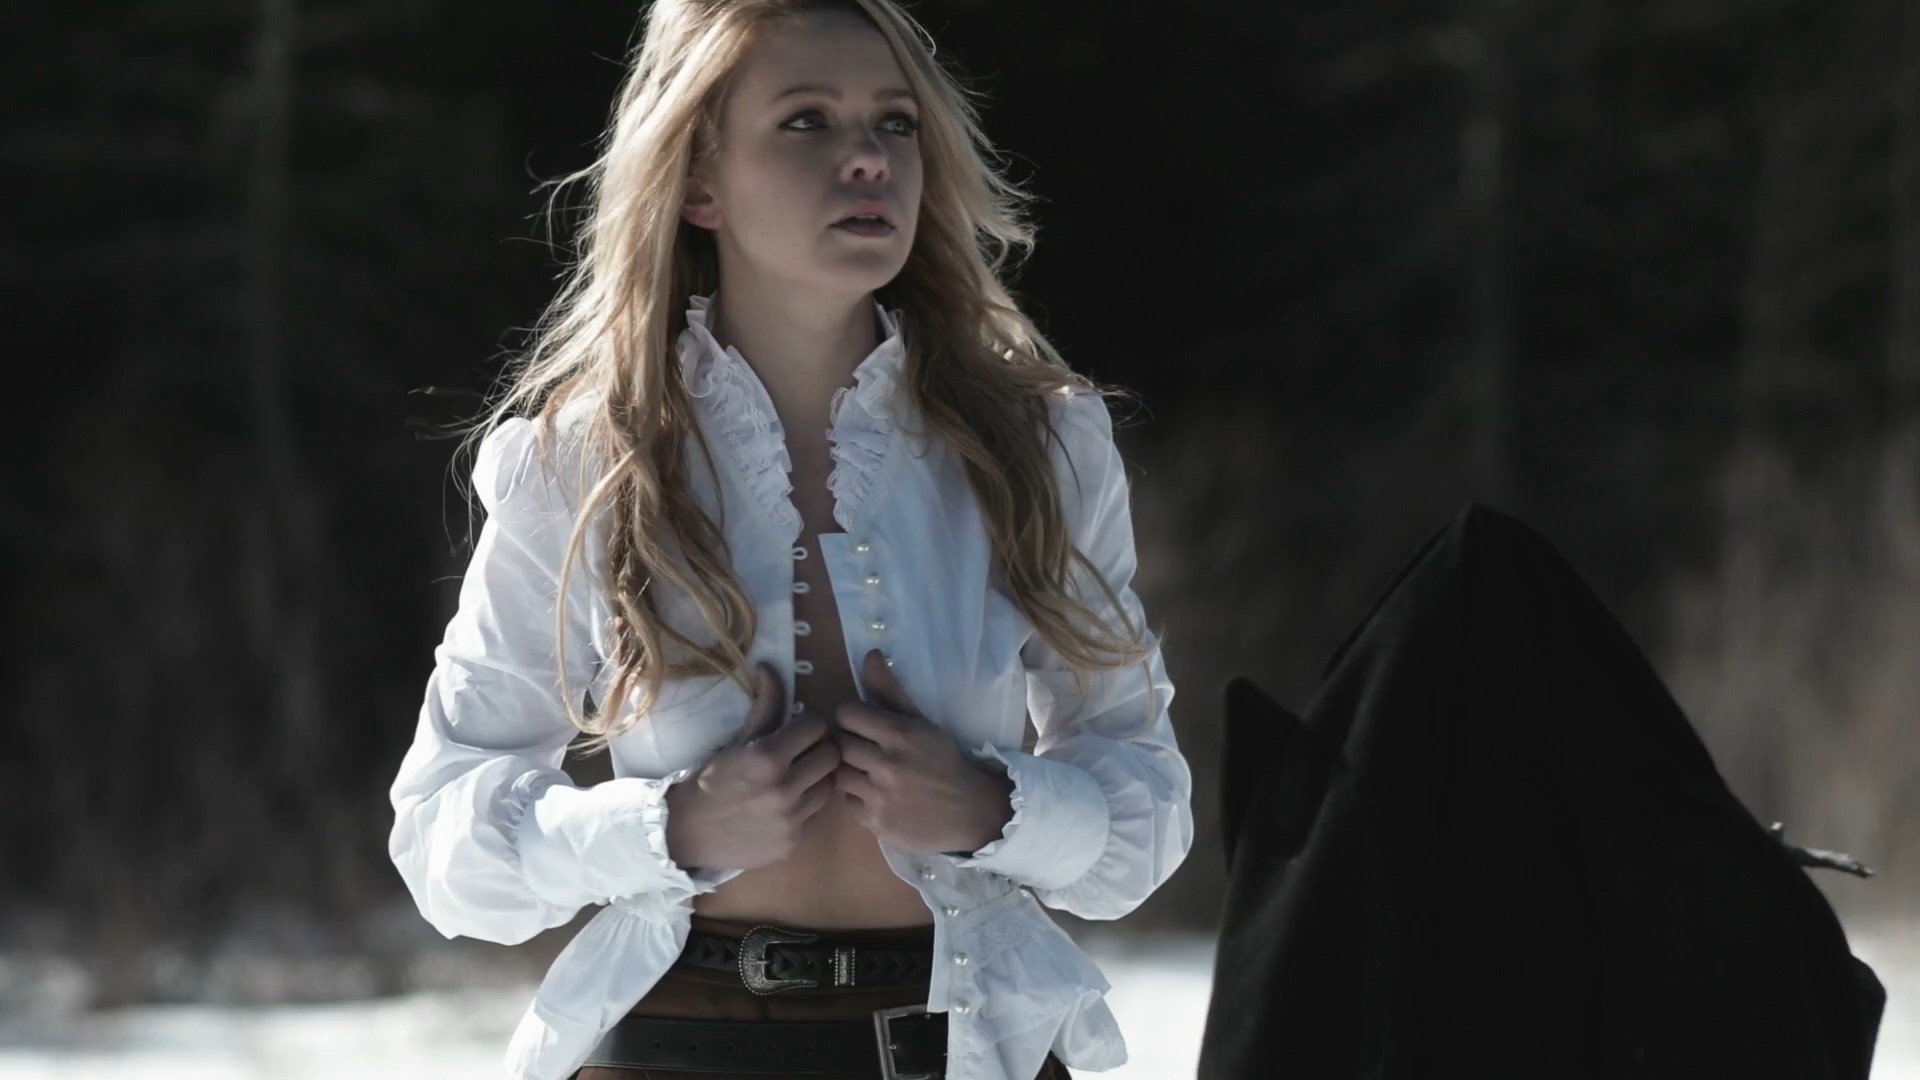 Karin Brauns - Once Upon A Time In Deadwood - 1080p.